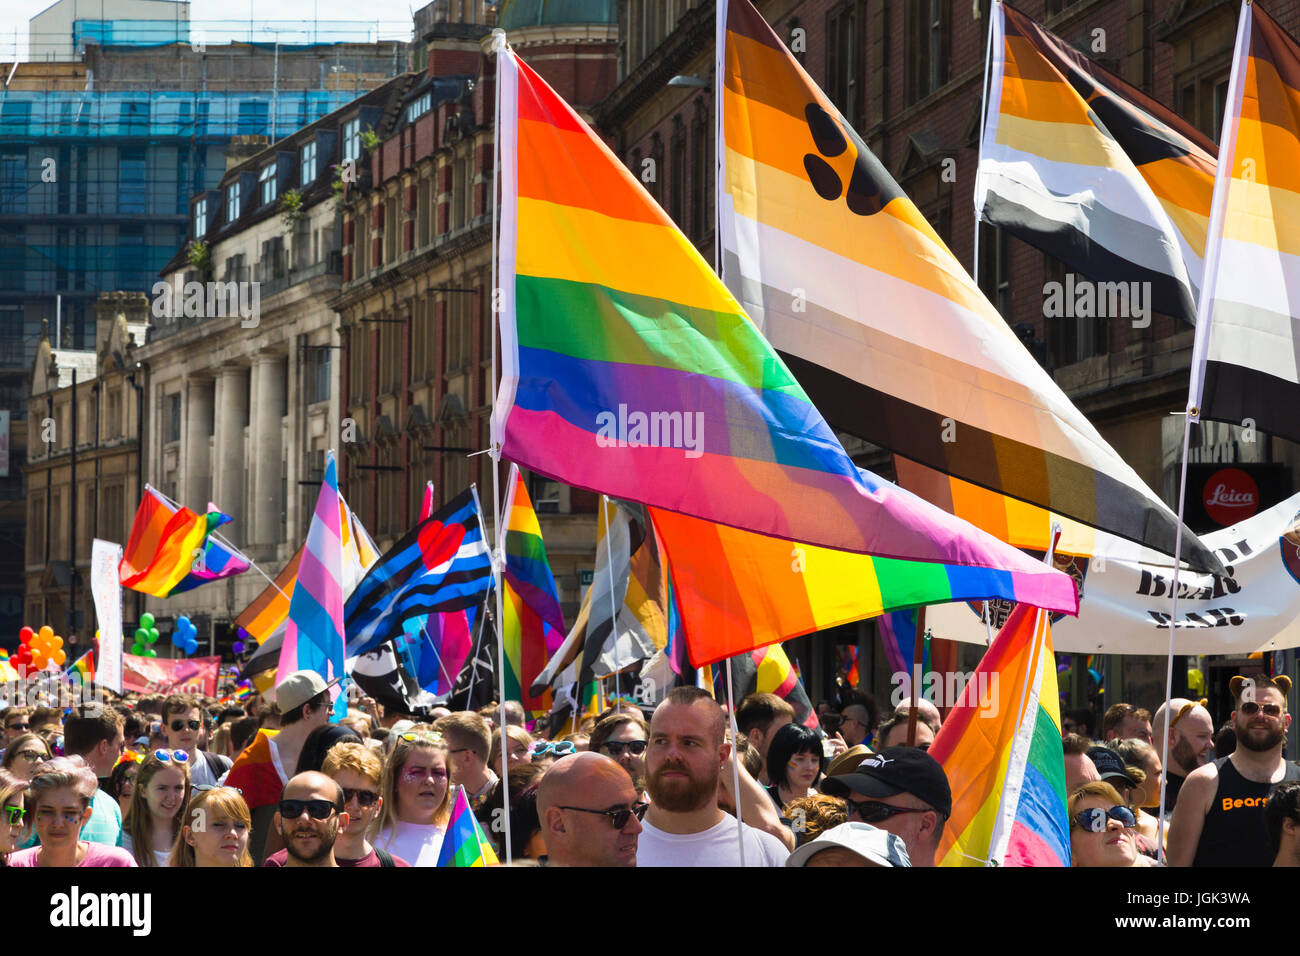 Bristol, UK. 8th July, 2017. Participants in a parade through the city center as part of the Bristol Pride Festival. Credit: Elizabeth Nunn/Alamy Live News. Stock Photo